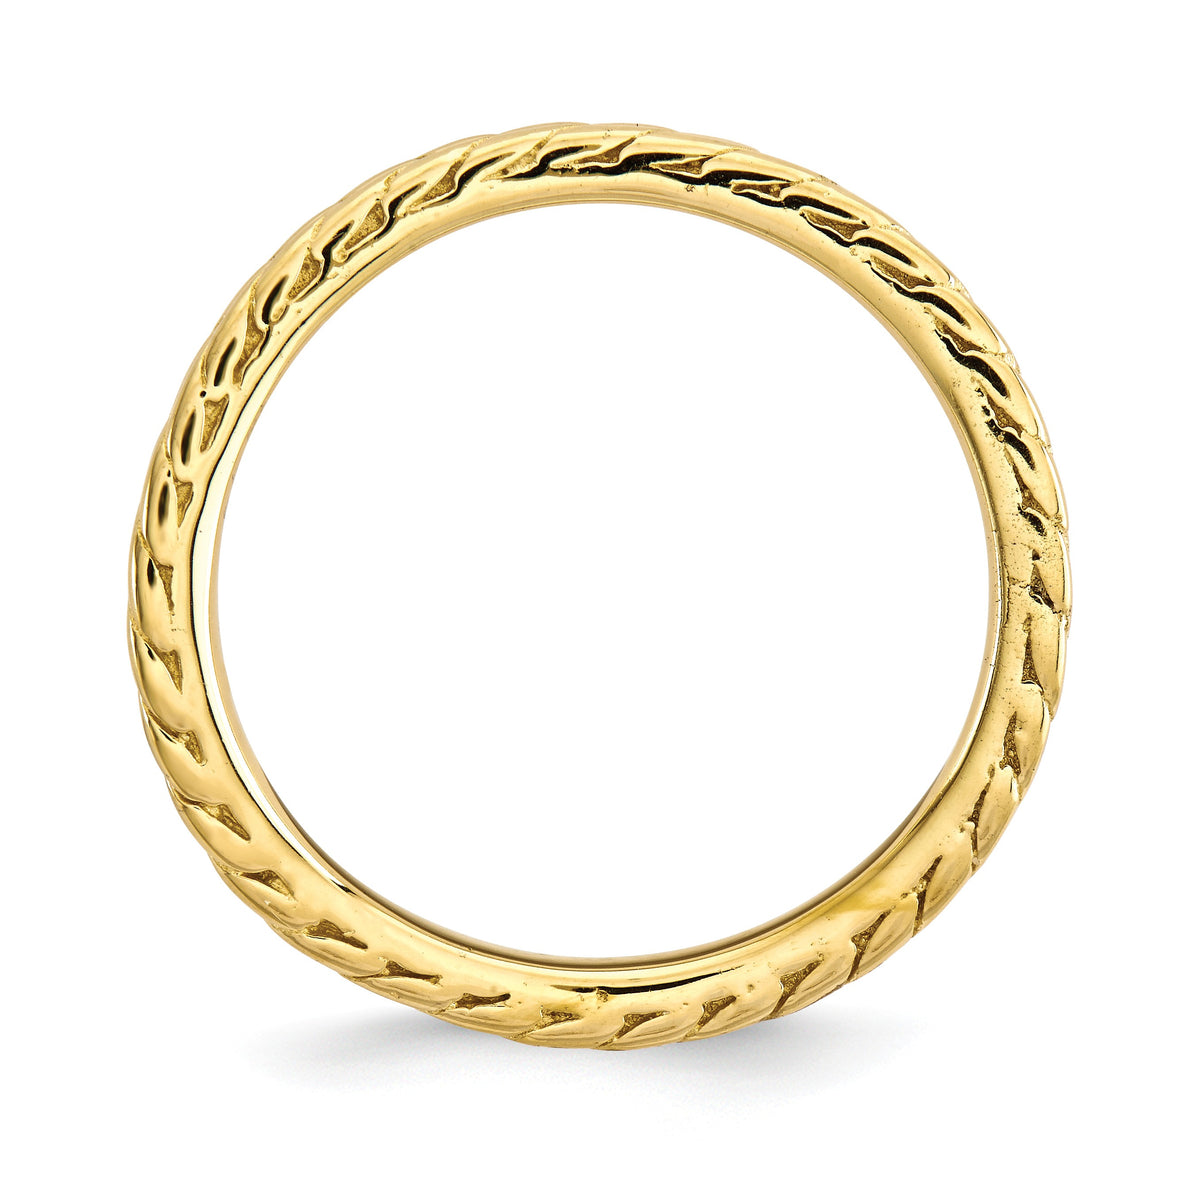 Alternate view of the 1.5mm Stackable 14K Yellow Gold Plated Silver Curved Wheat Band by The Black Bow Jewelry Co.